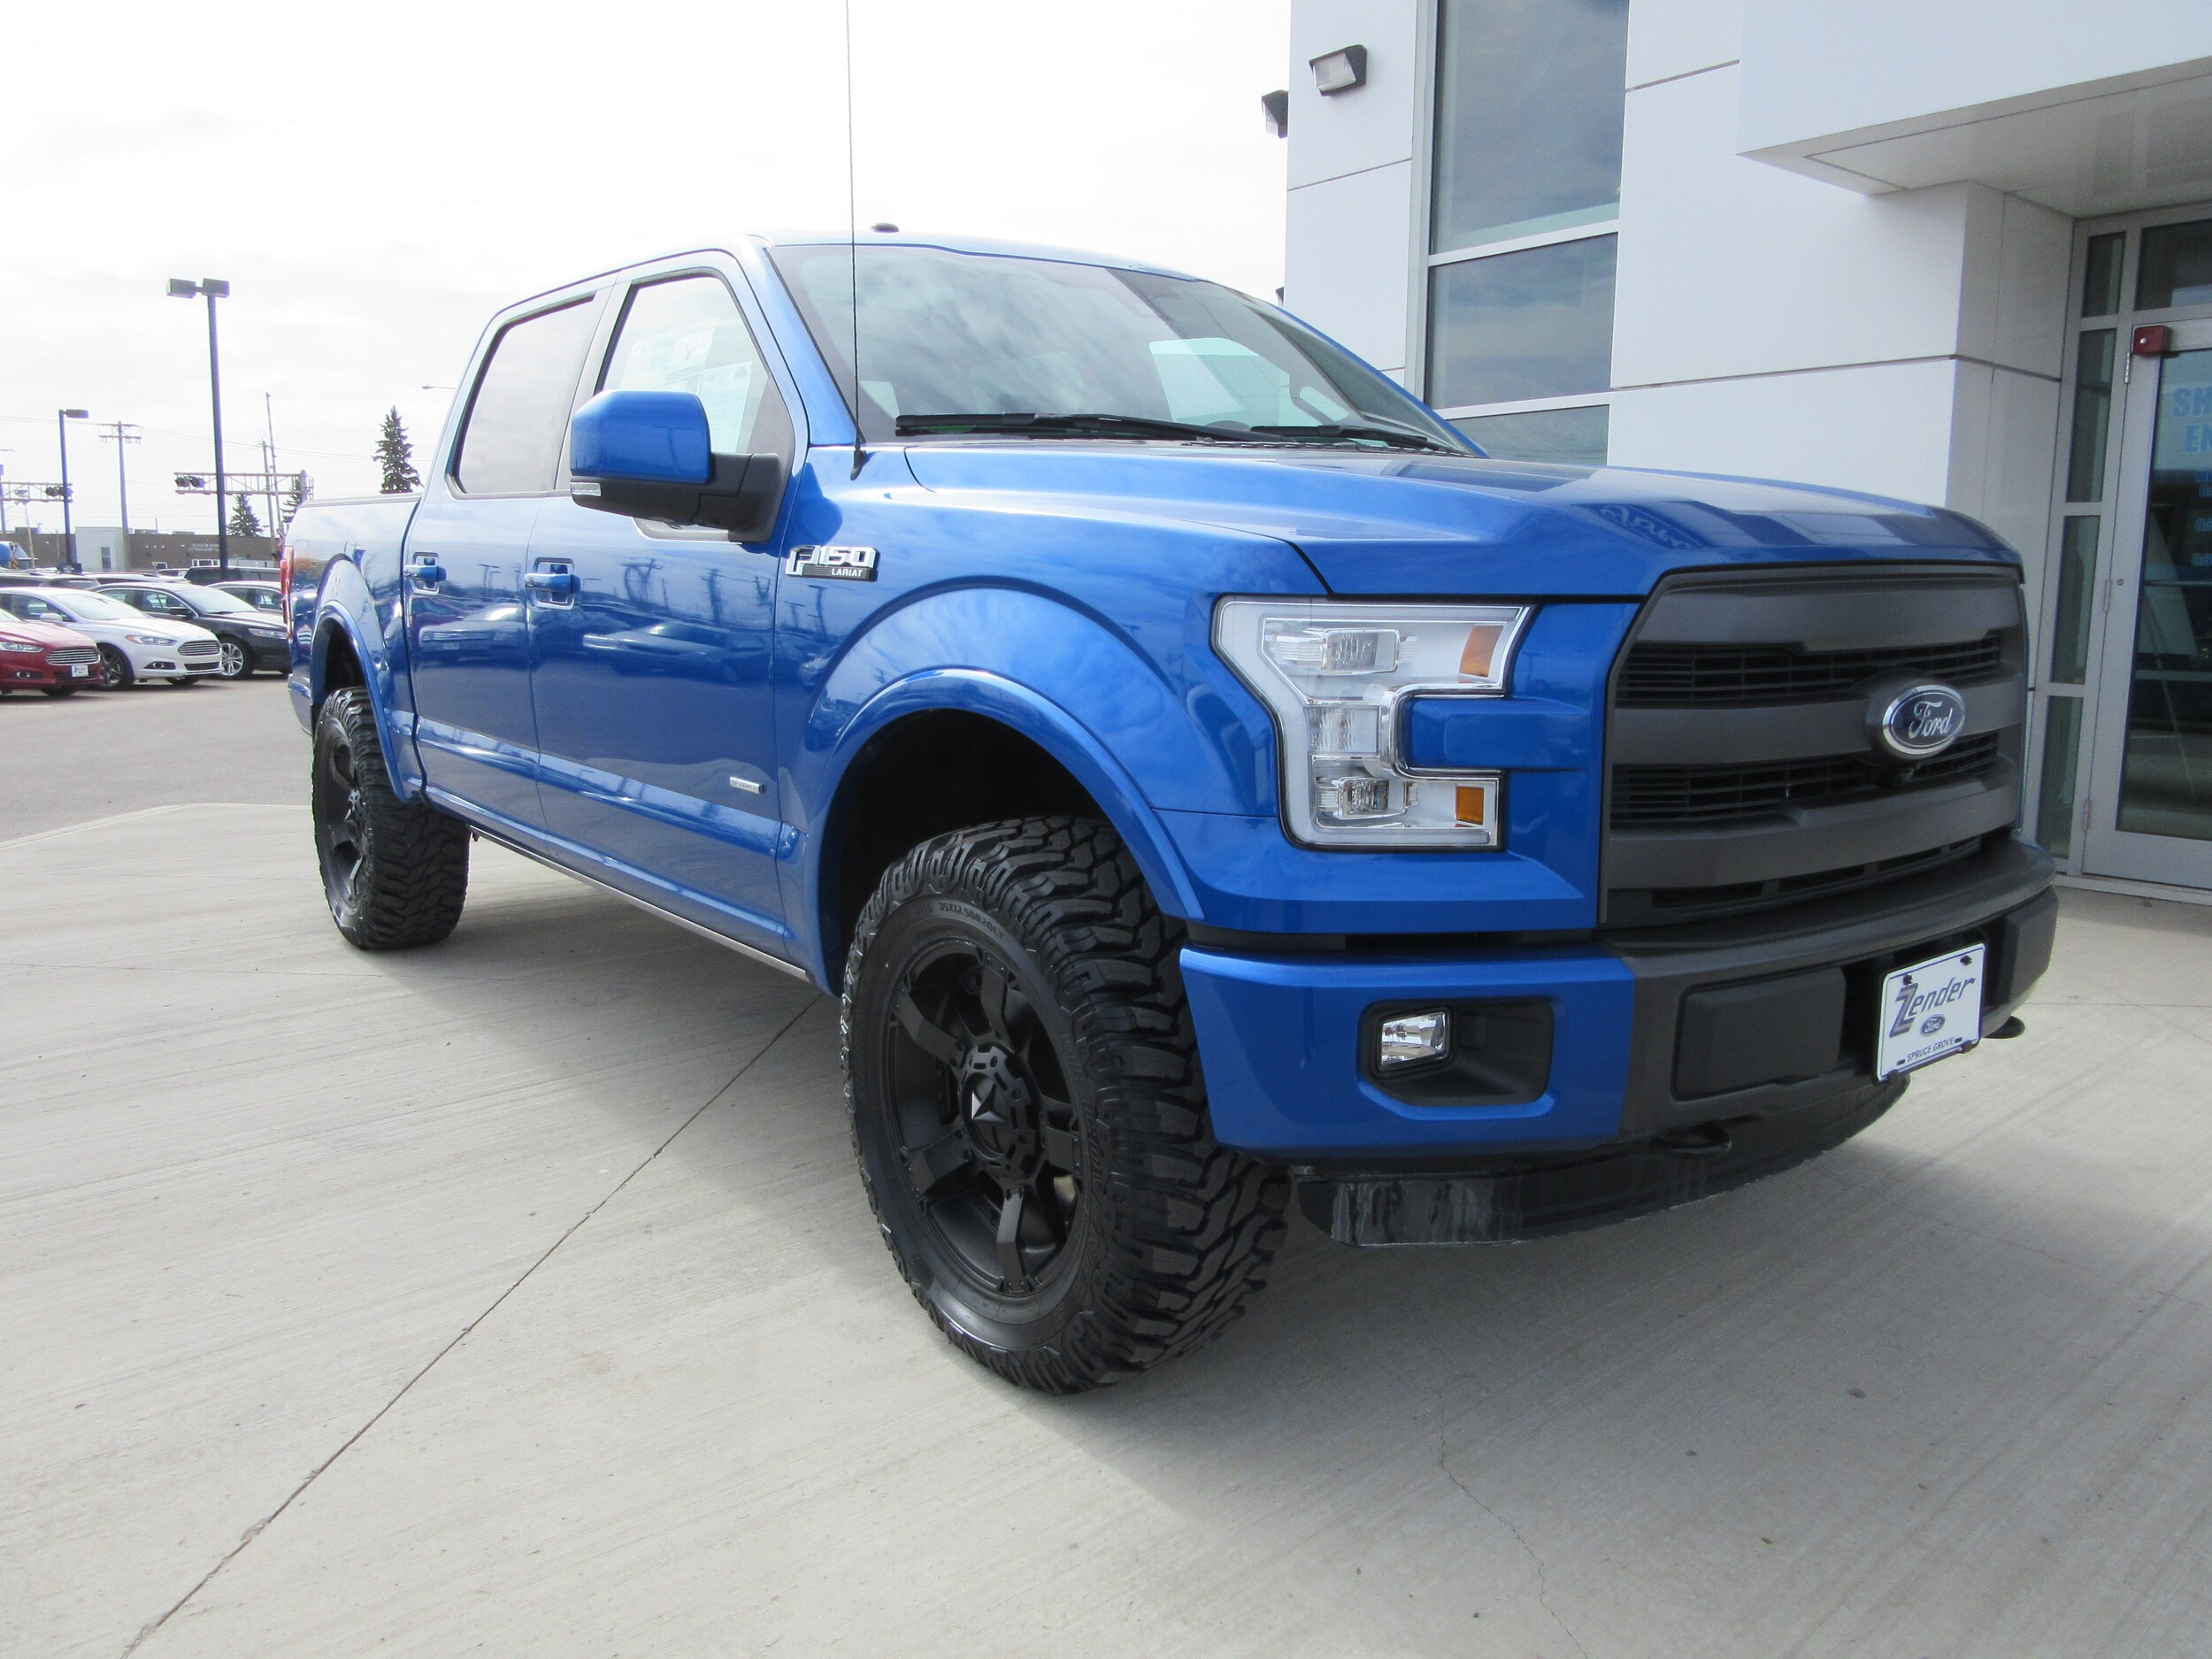 Competition ford spruce grove #2